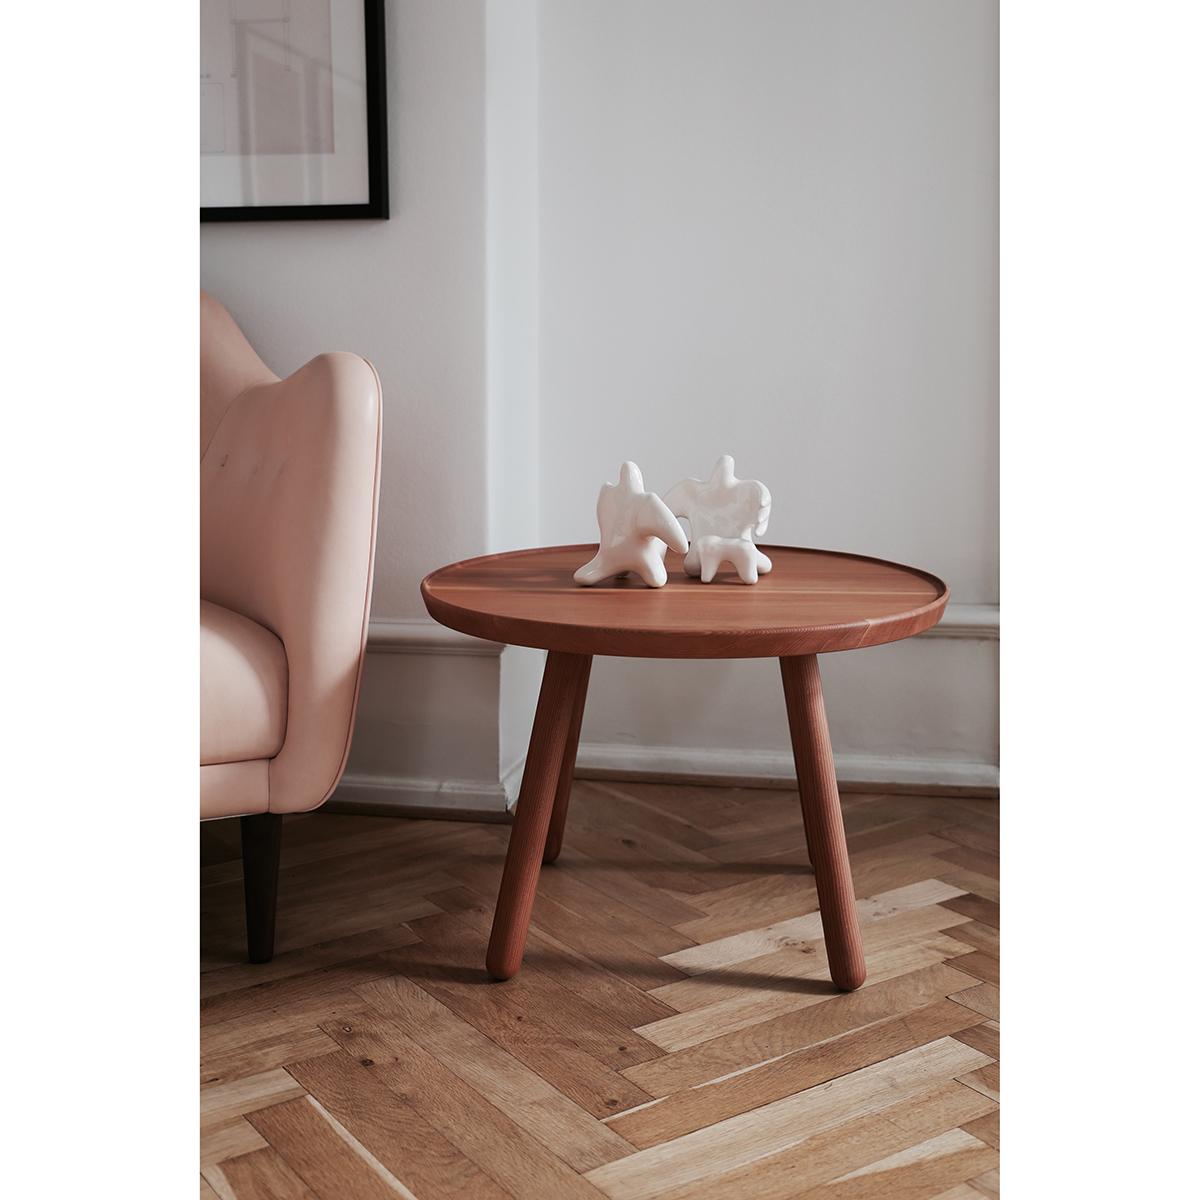 Set of Pelican Chair in Wood and Fabric and Pelican Table by Finn Juhl 1